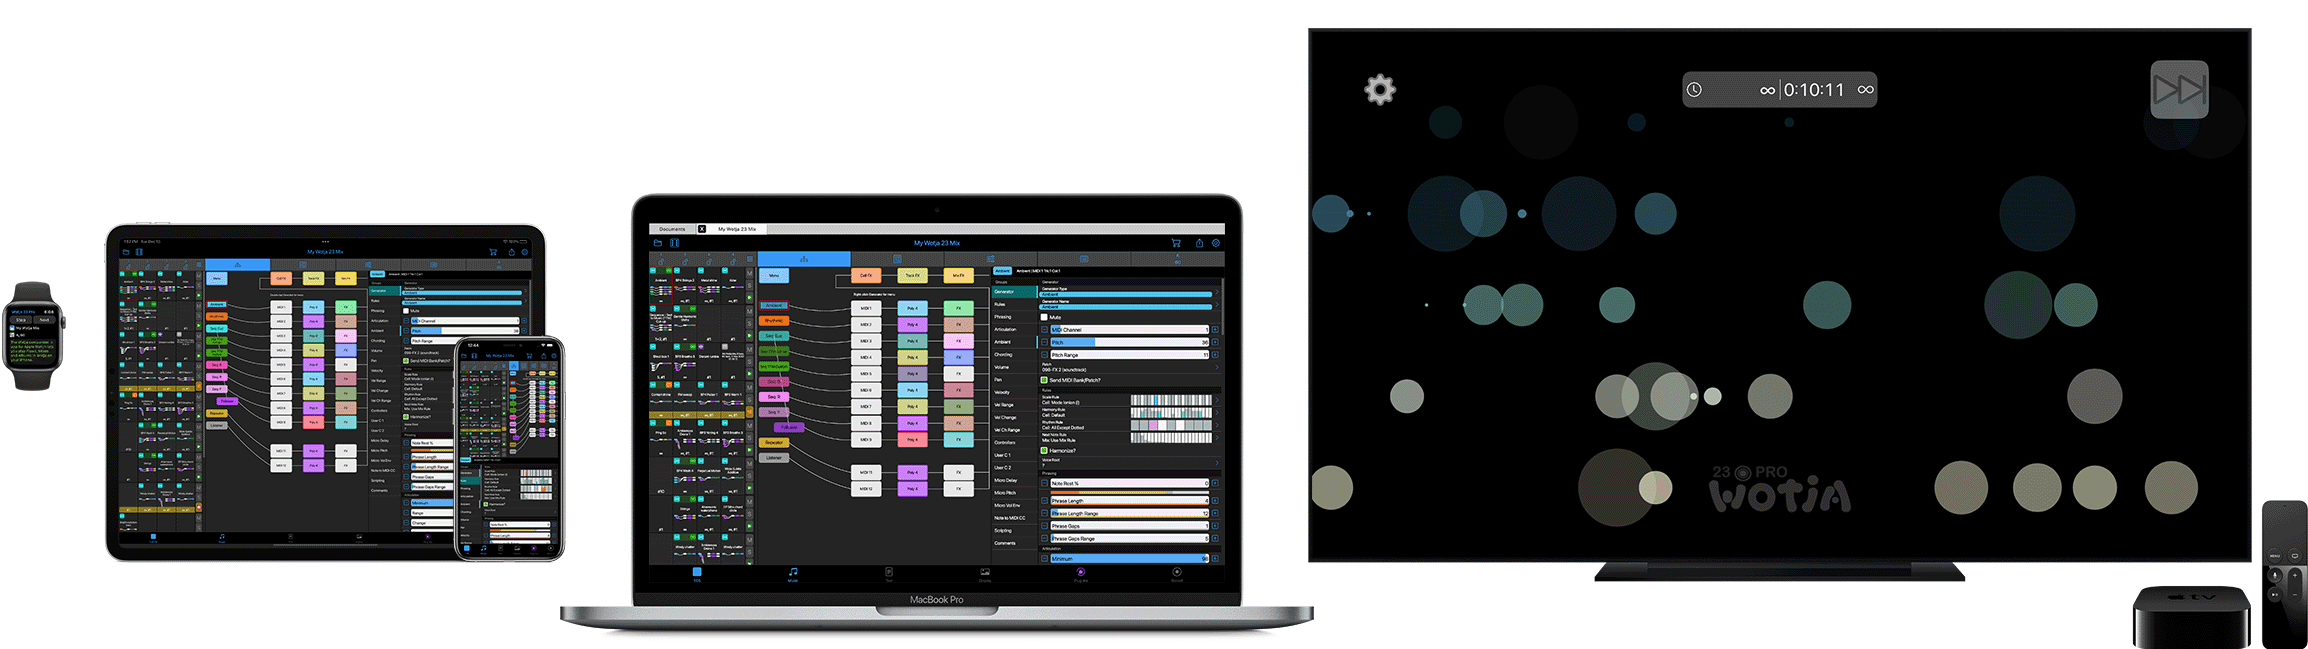 Wotja®: FREE Software for Live Generative Music & MIDI - AUv3/VST3 Host App & Plugin: Find out more!